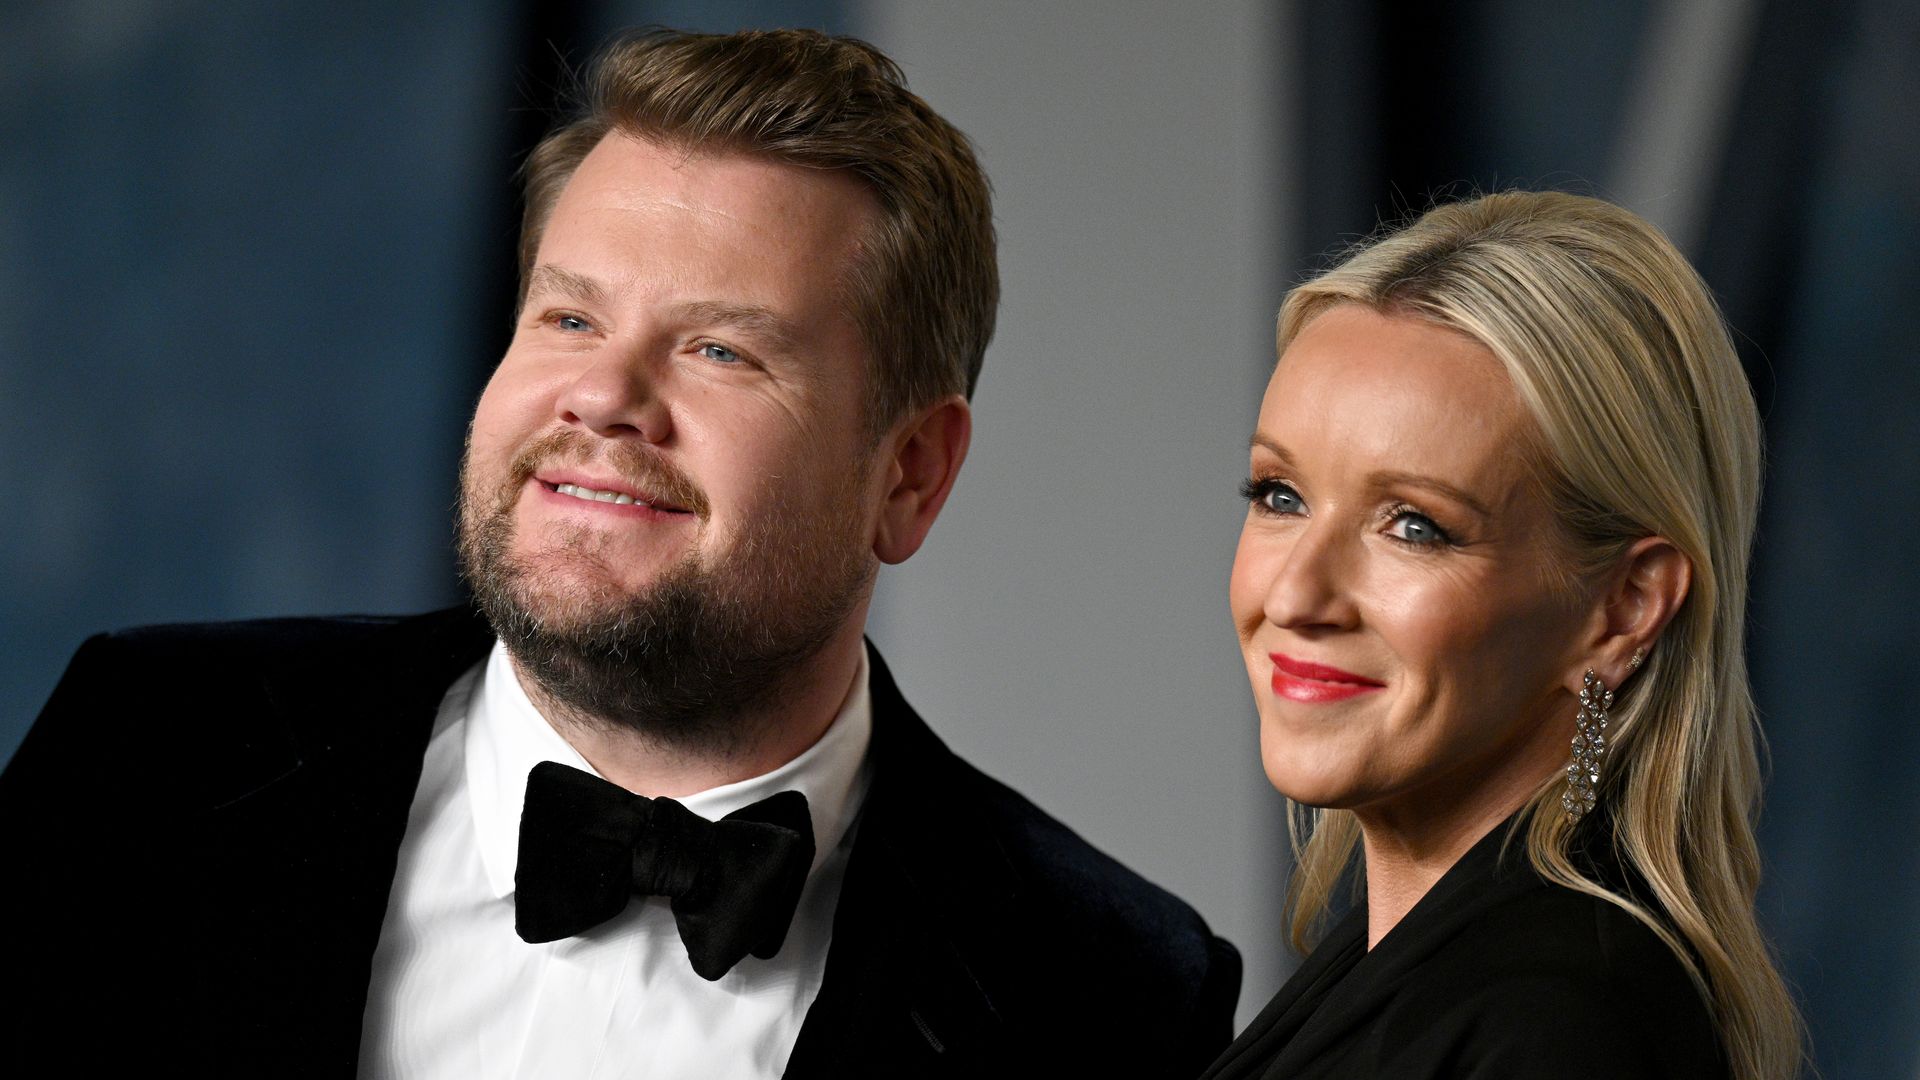 James Corden and Julia Carey attend the 2023 Vanity Fair Oscar Party Hosted By Radhika Jones at Wallis Annenberg Center for the Performing Arts on March 12, 2023 in Beverly Hills, California